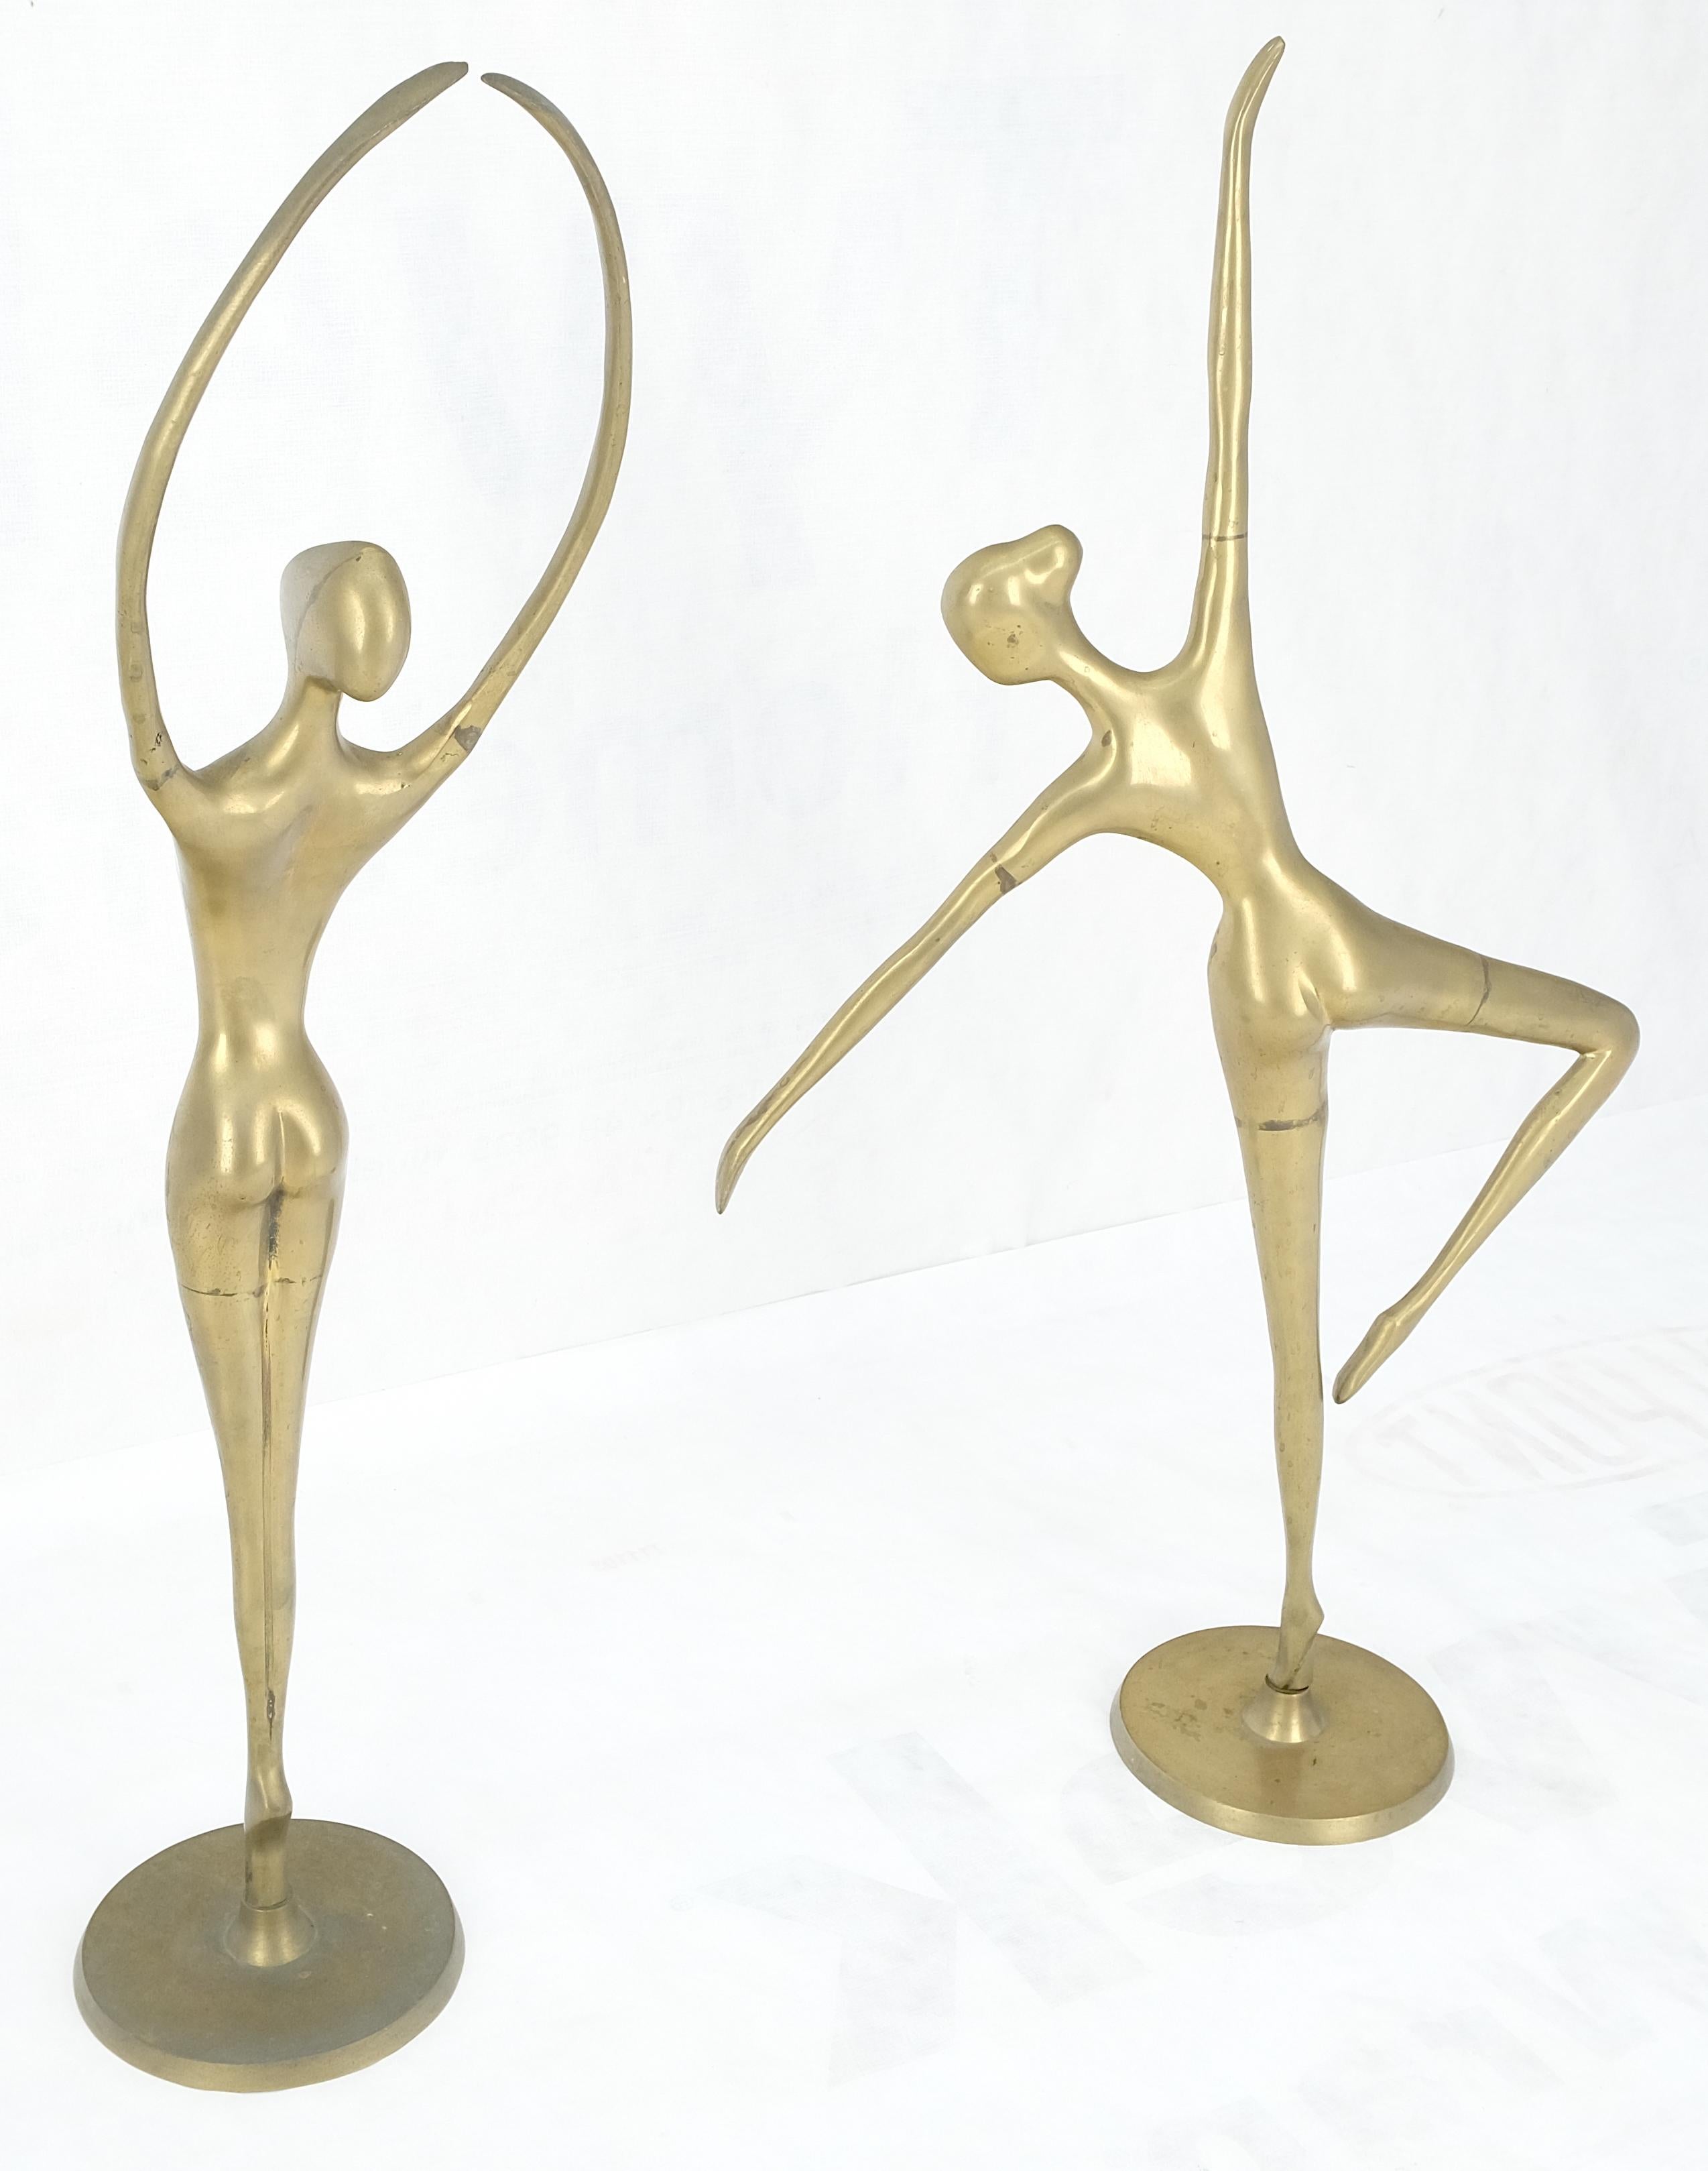 Pair of 3 Foot Tall Solid Brass Ballerina Dancers Sculptures Figurines Statue  For Sale 2